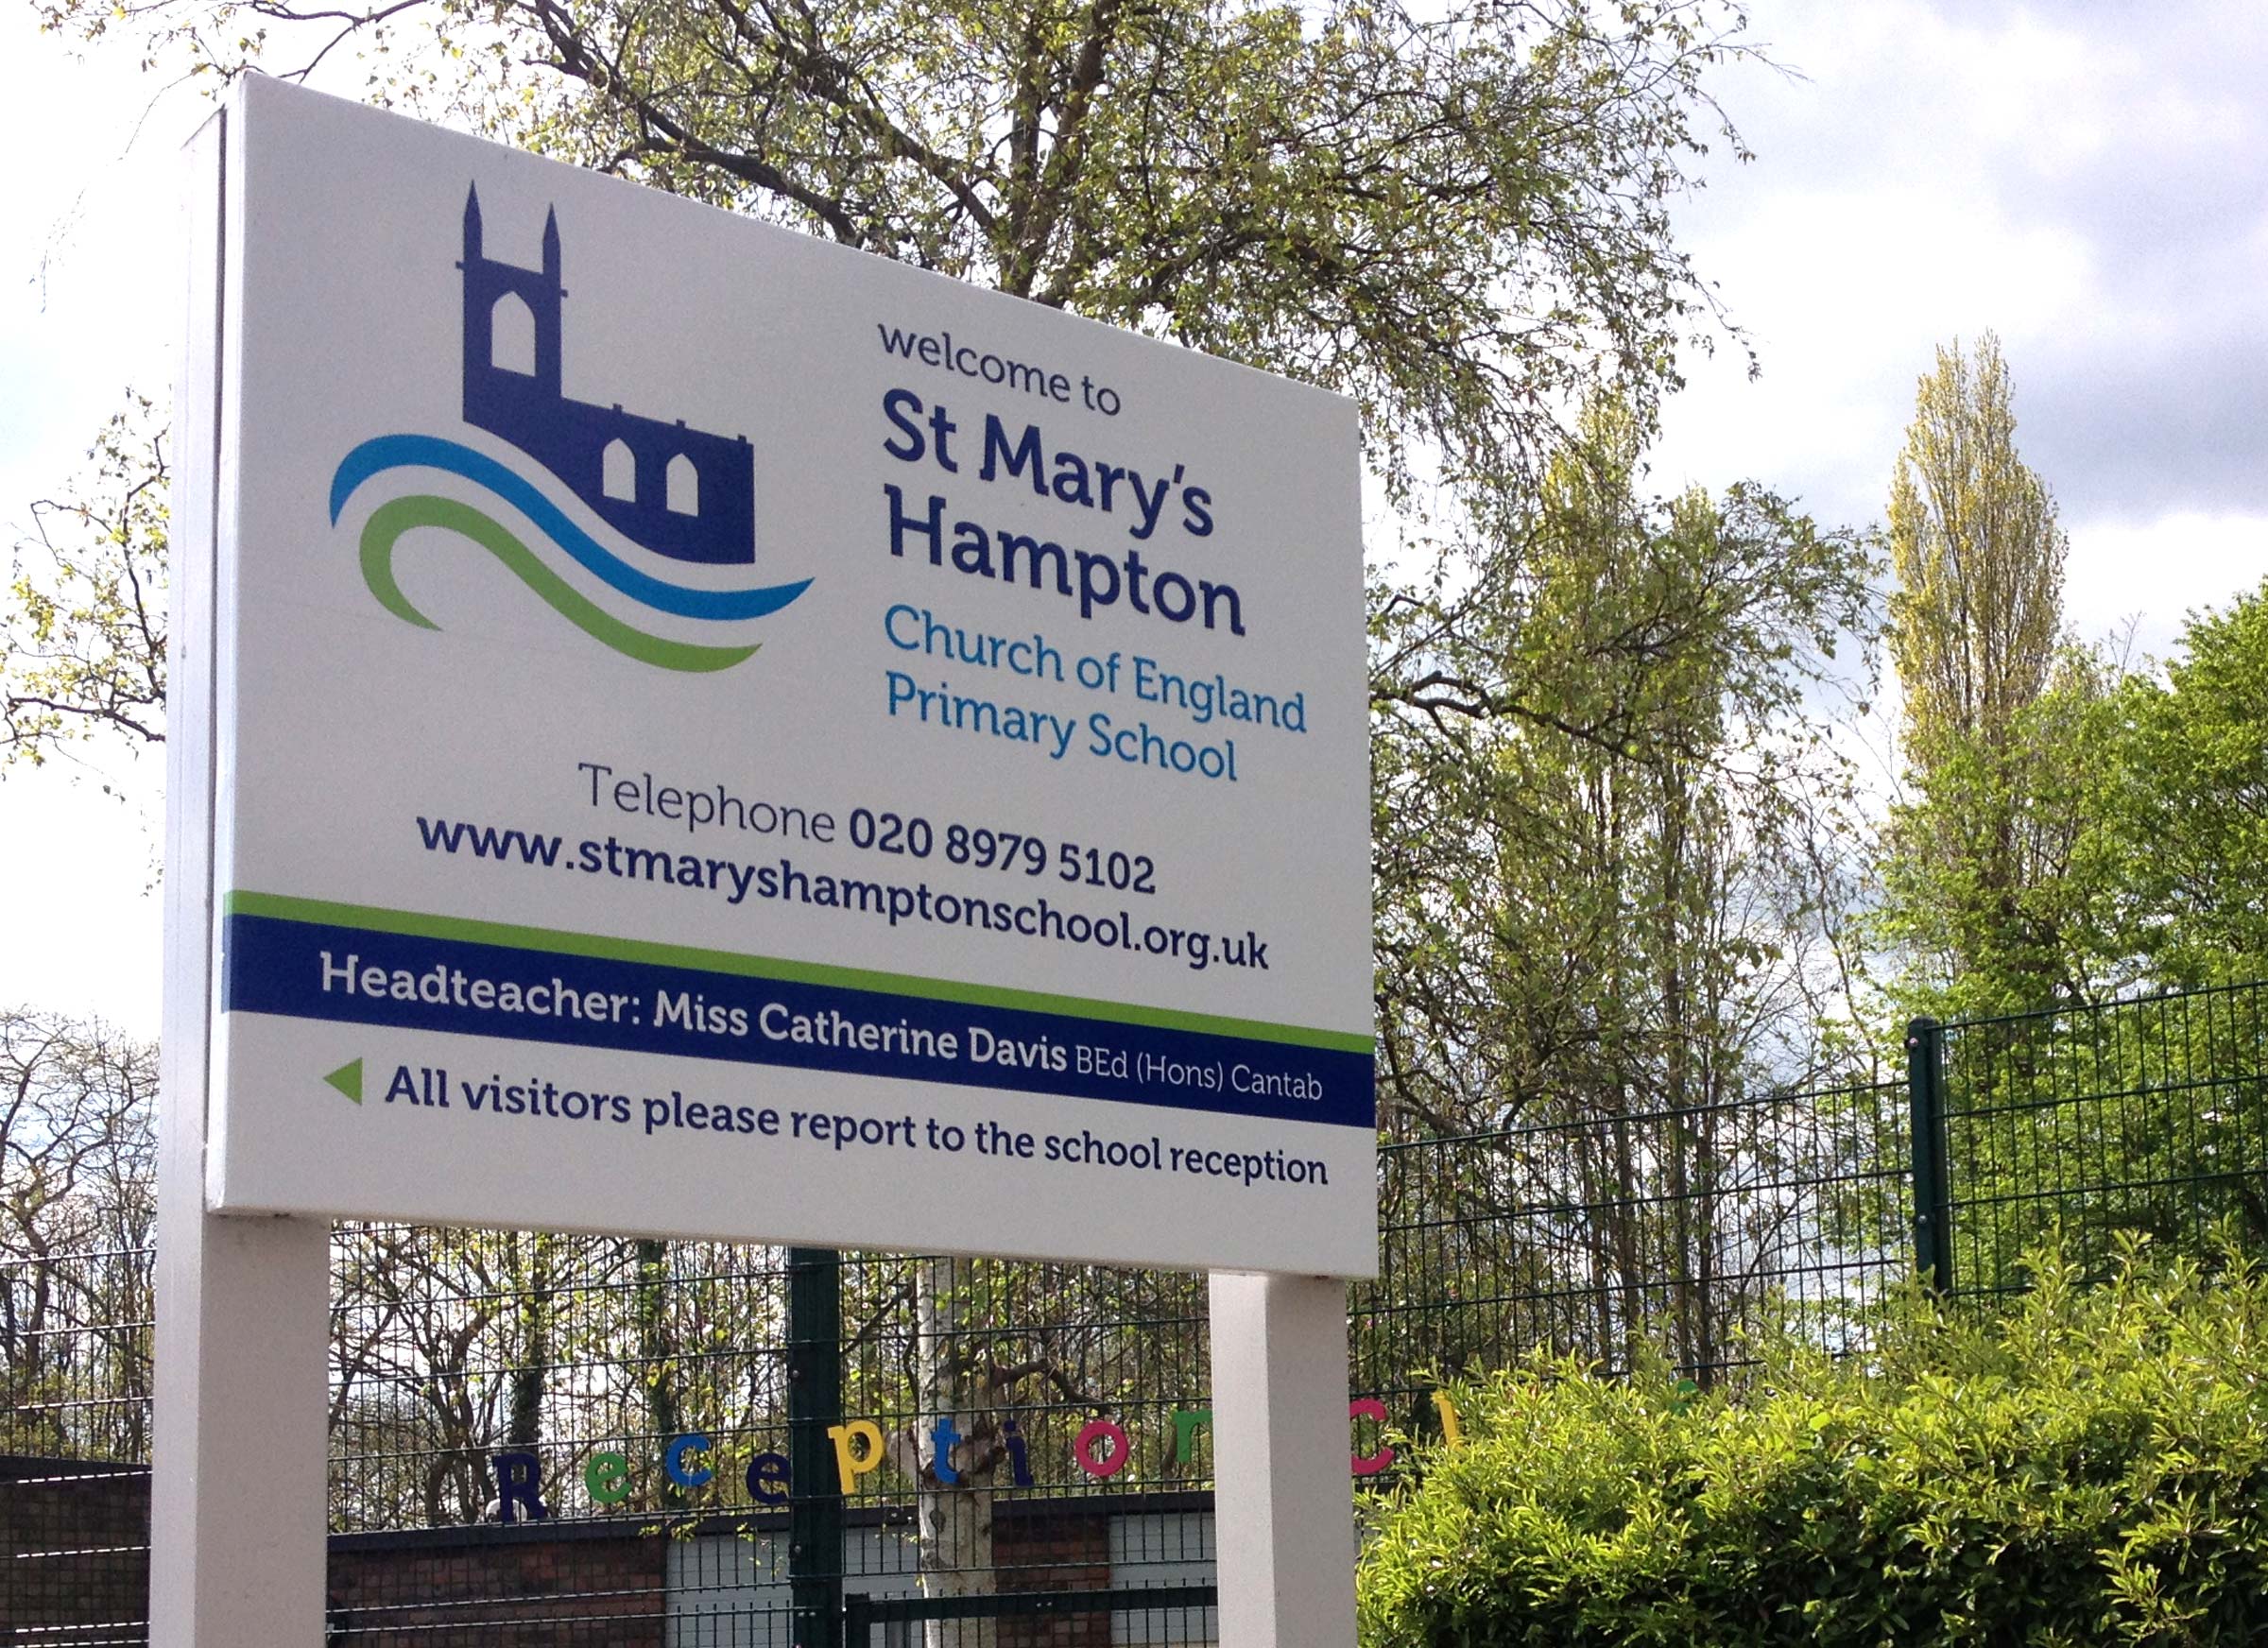 St Mary’s primary school signage